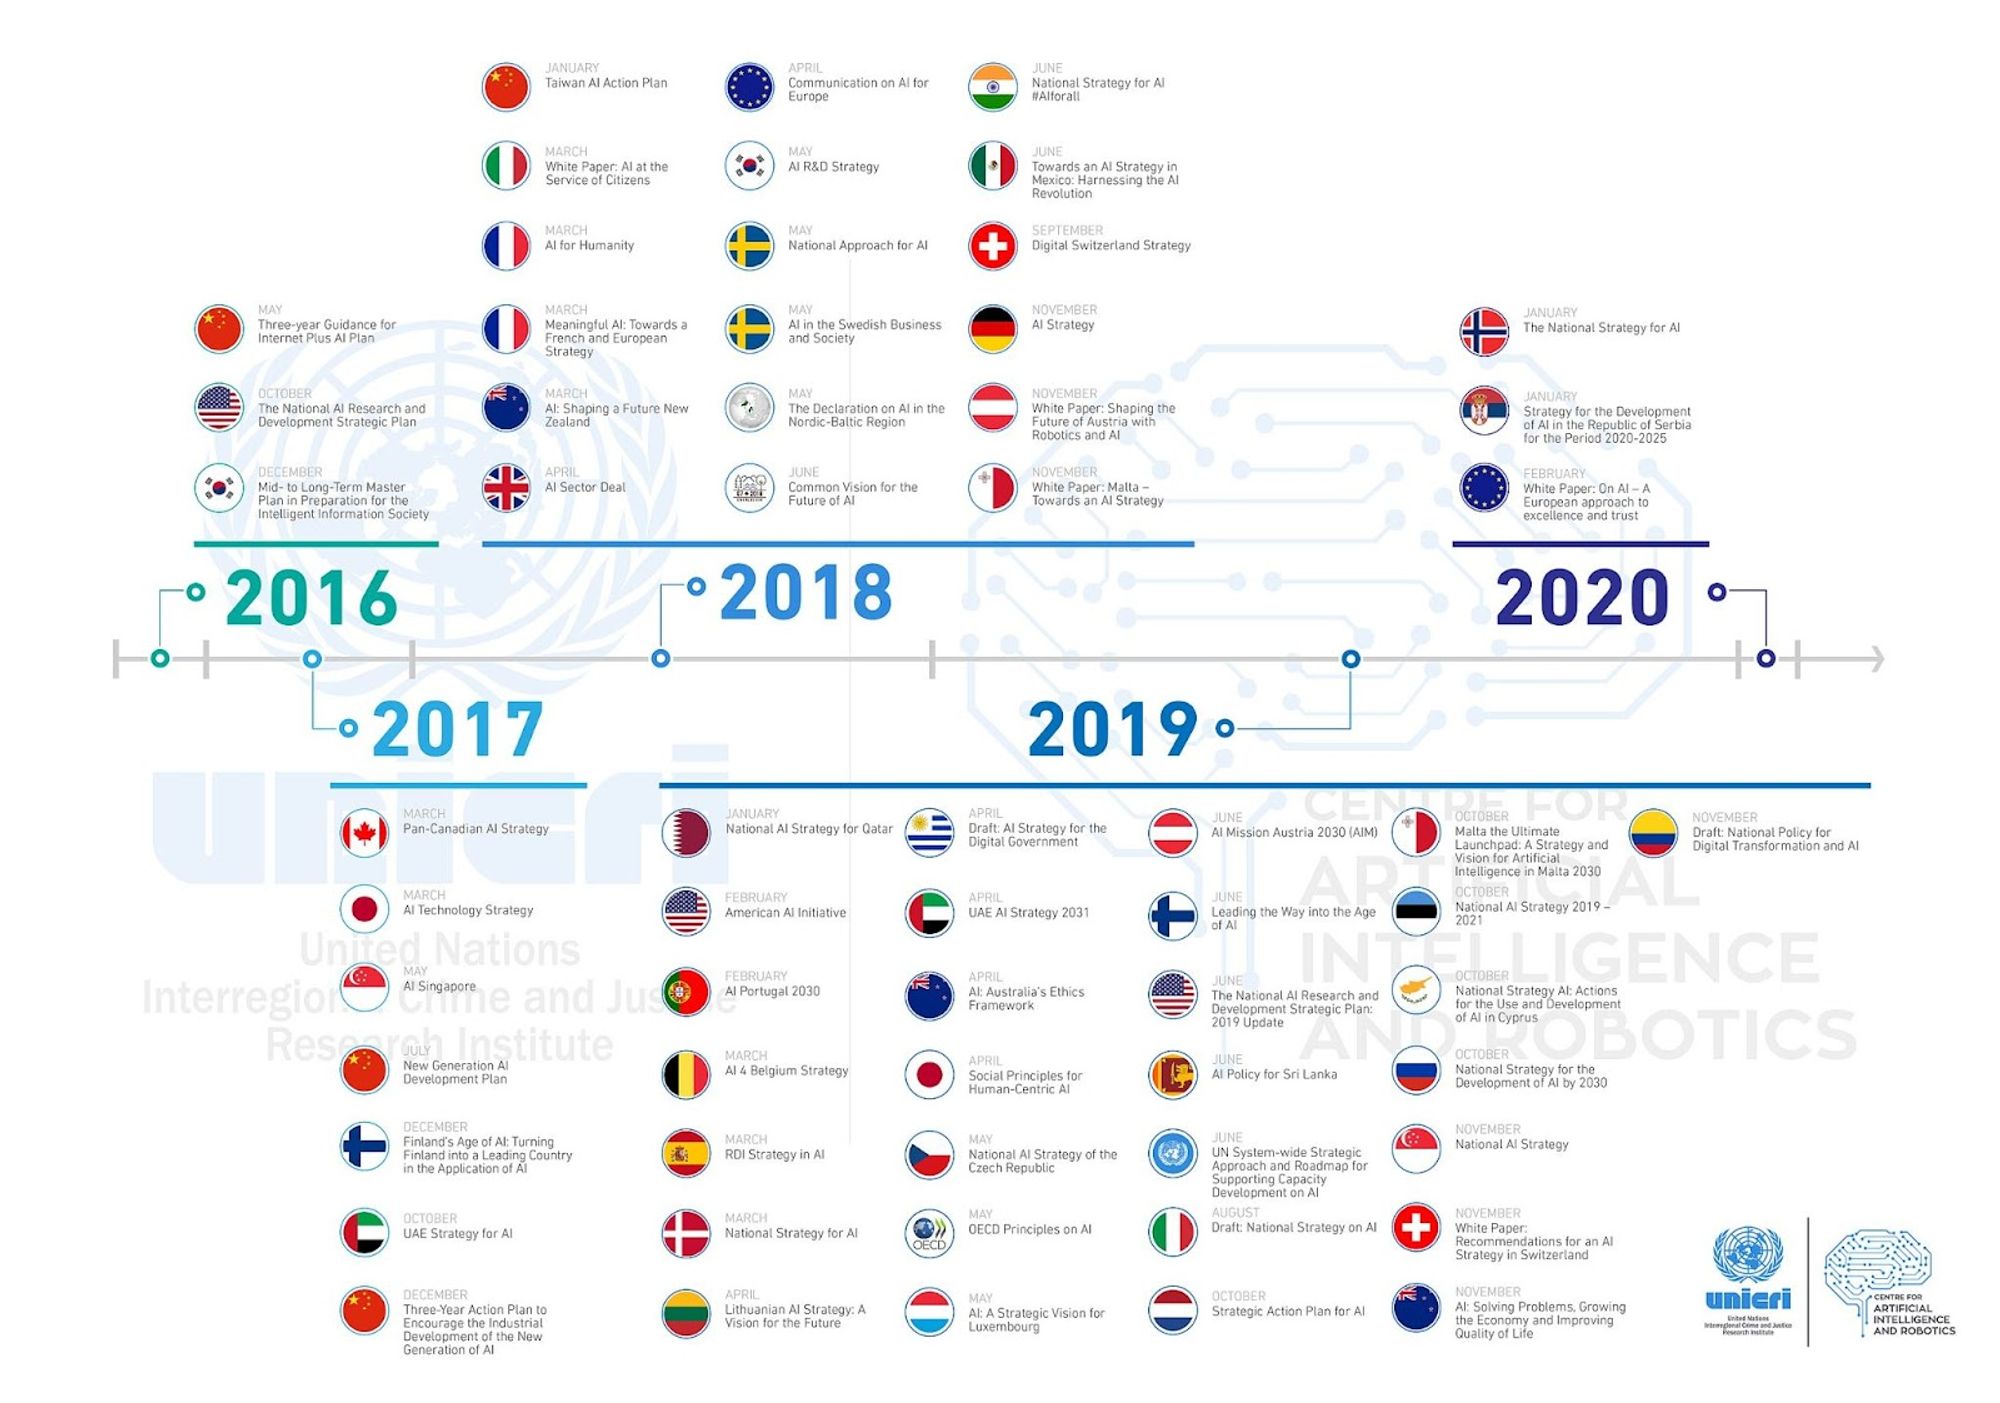 AI regulations over the past years.